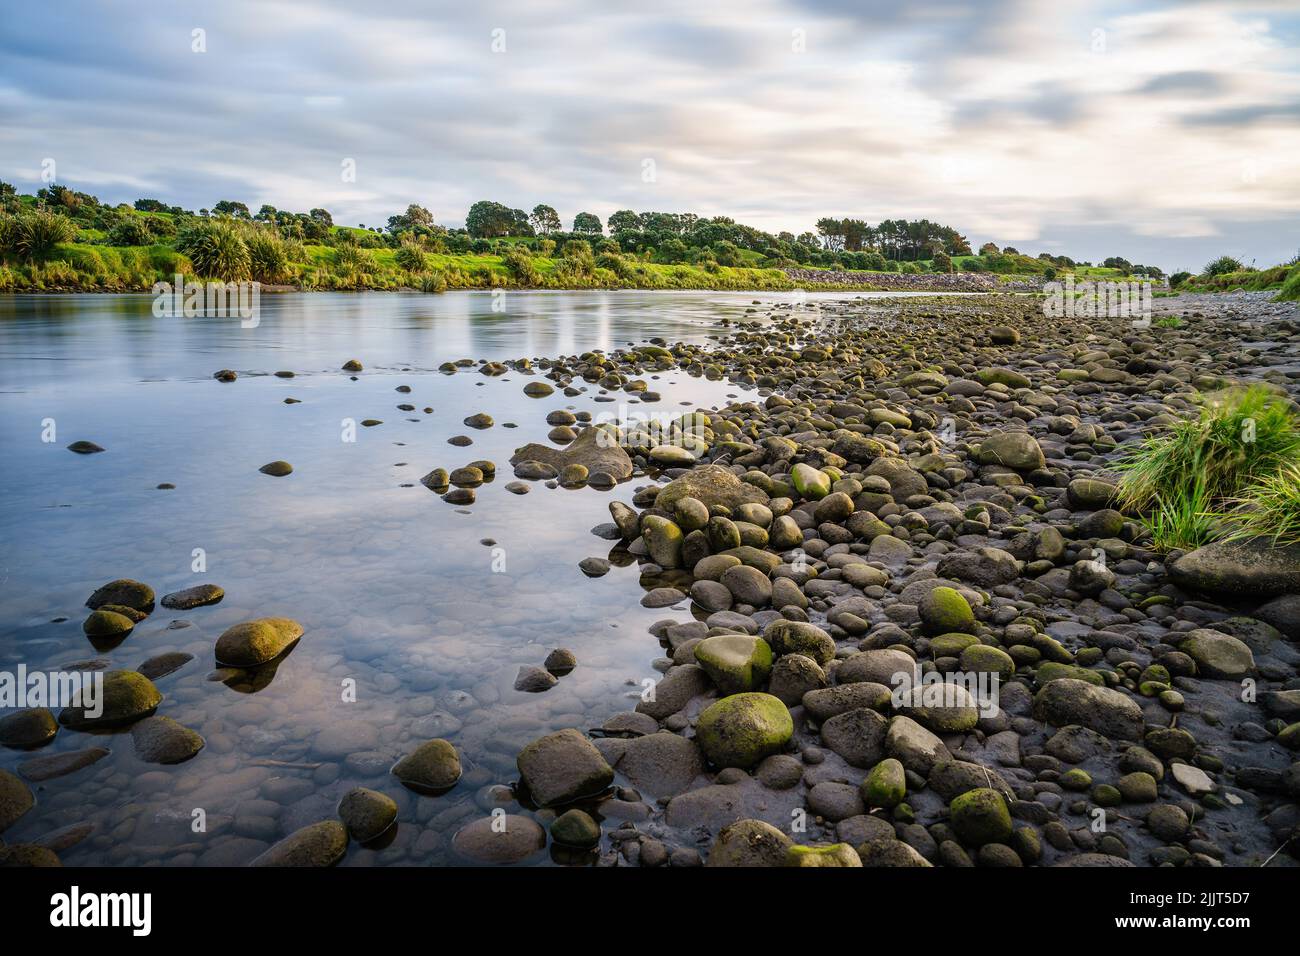 A beautiful view of the river filled with big rocks in New Plymouth, New Zealand Stock Photo